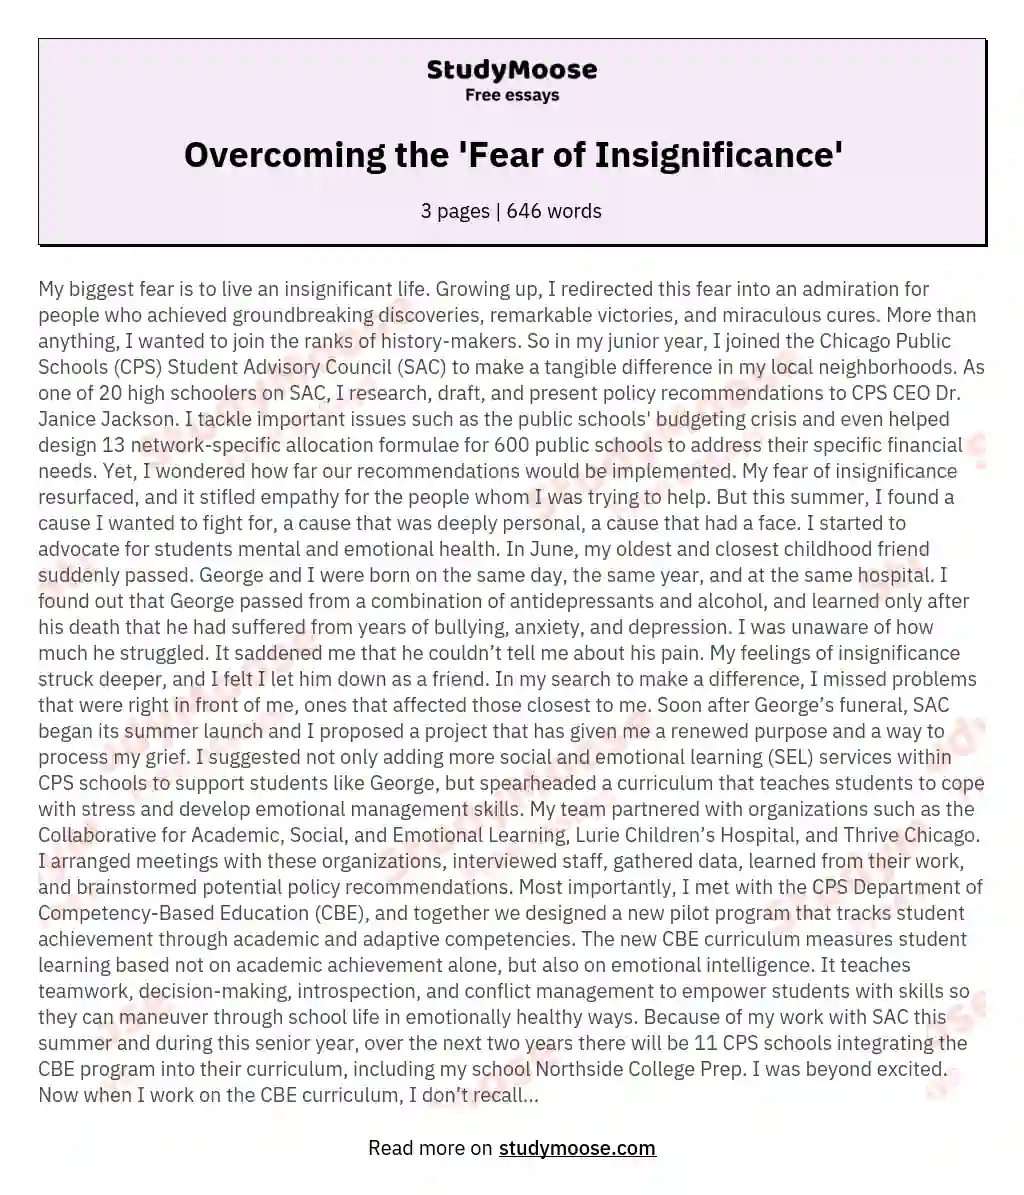 Overcoming the 'Fear of Insignificance' essay